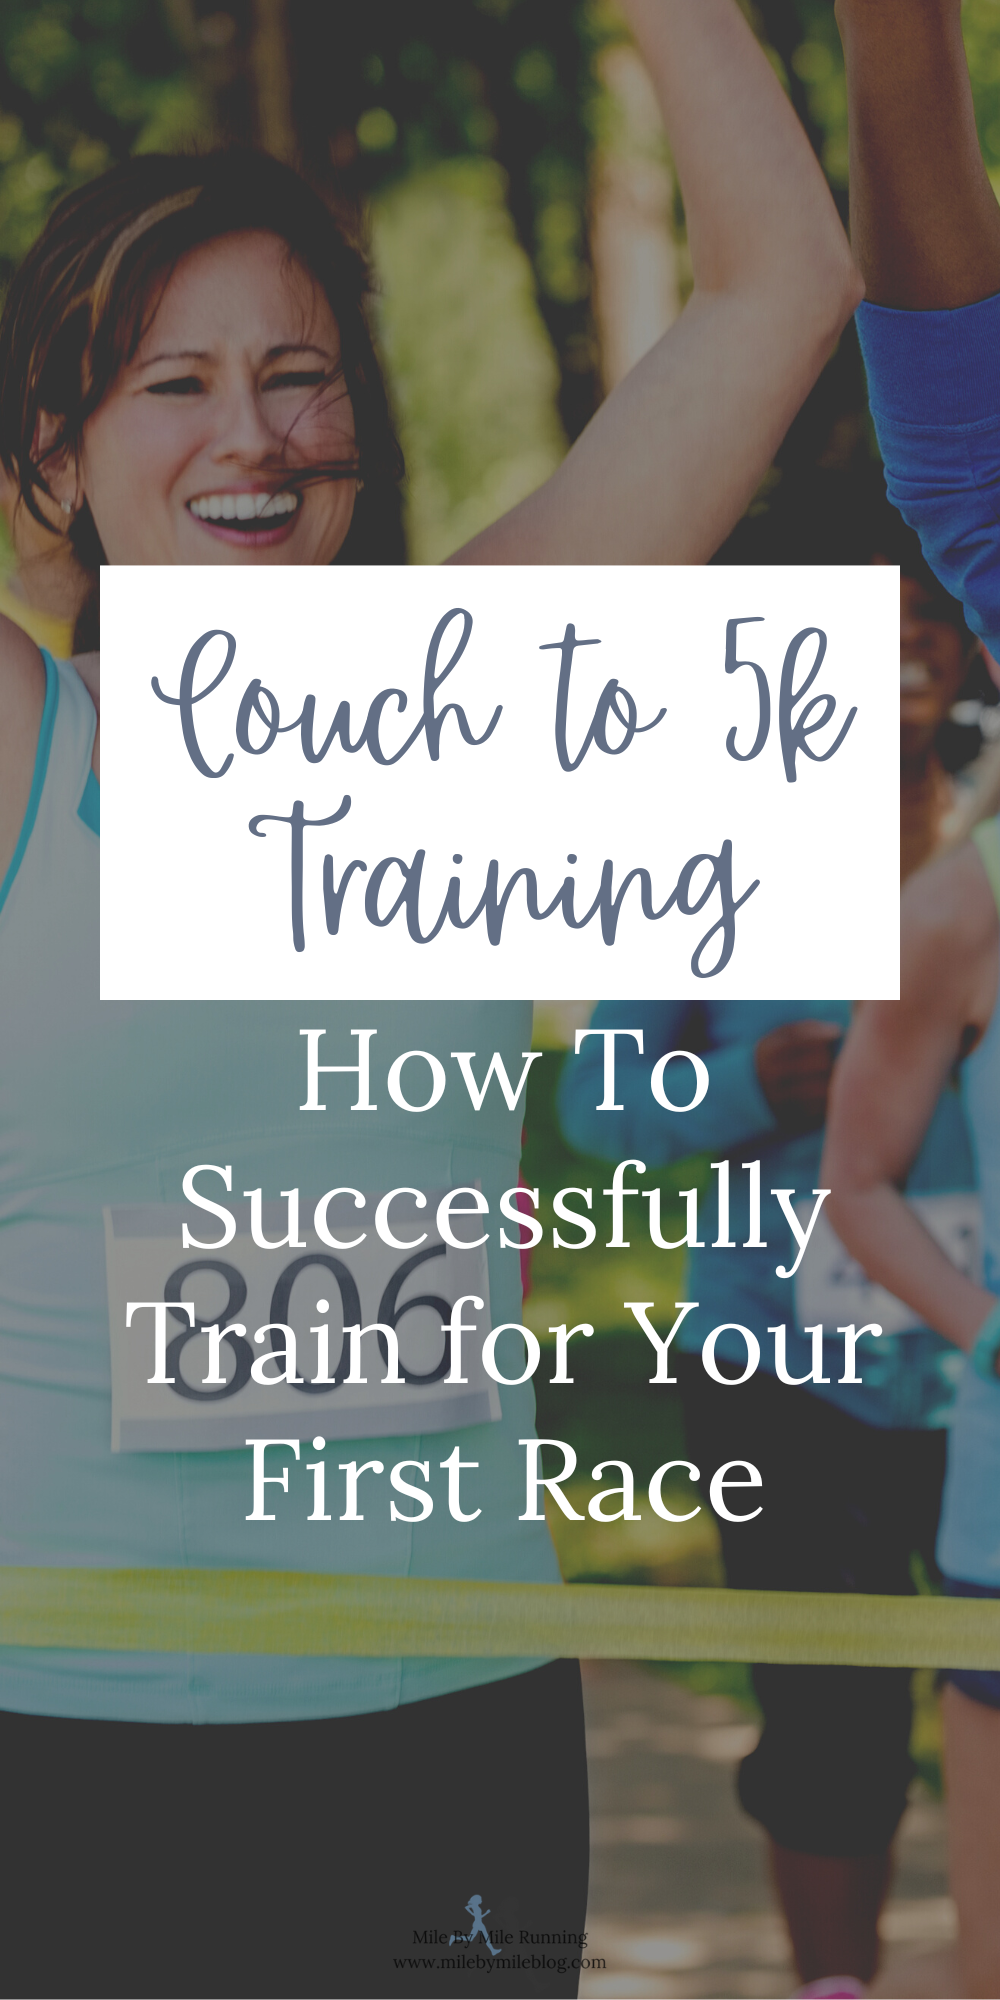 I. Introduction: Getting Started with Race Training